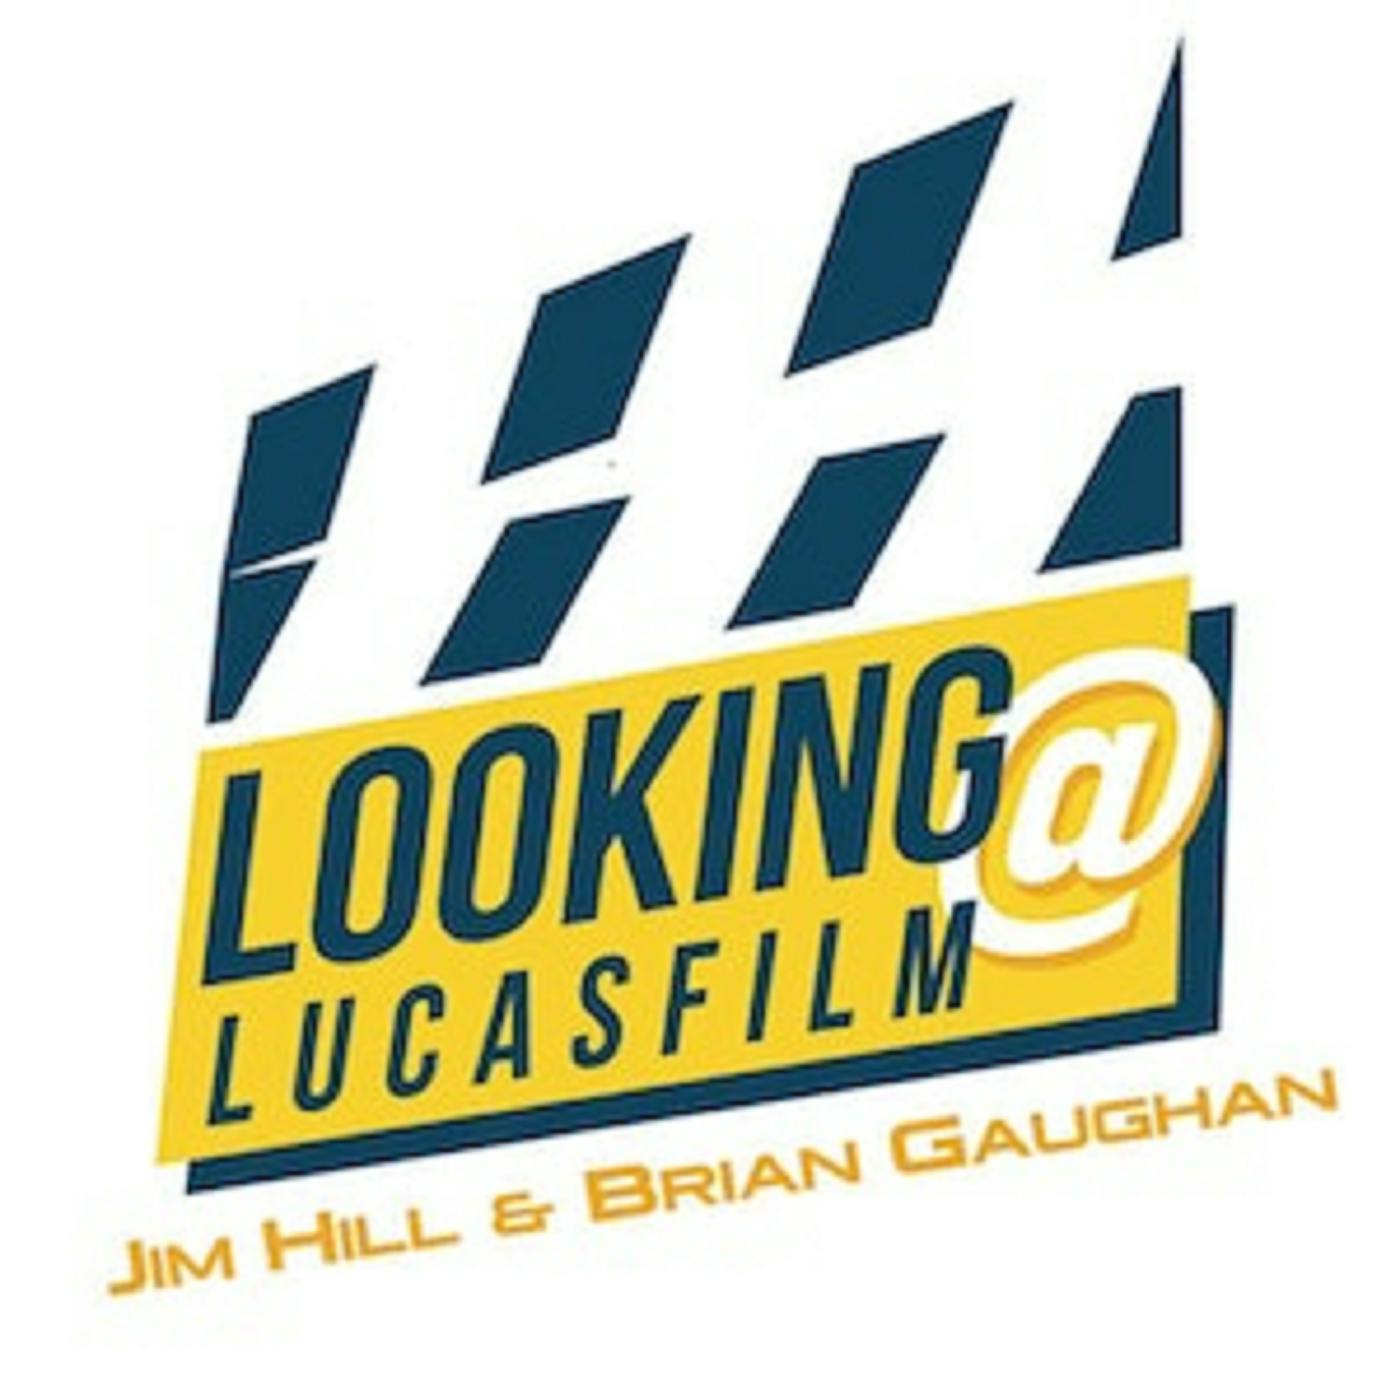 Looking at Lucasfilm with Brian Gaughan Ep94 : Star Wars TruMoo Blue Milk hits store shelves nationally next month